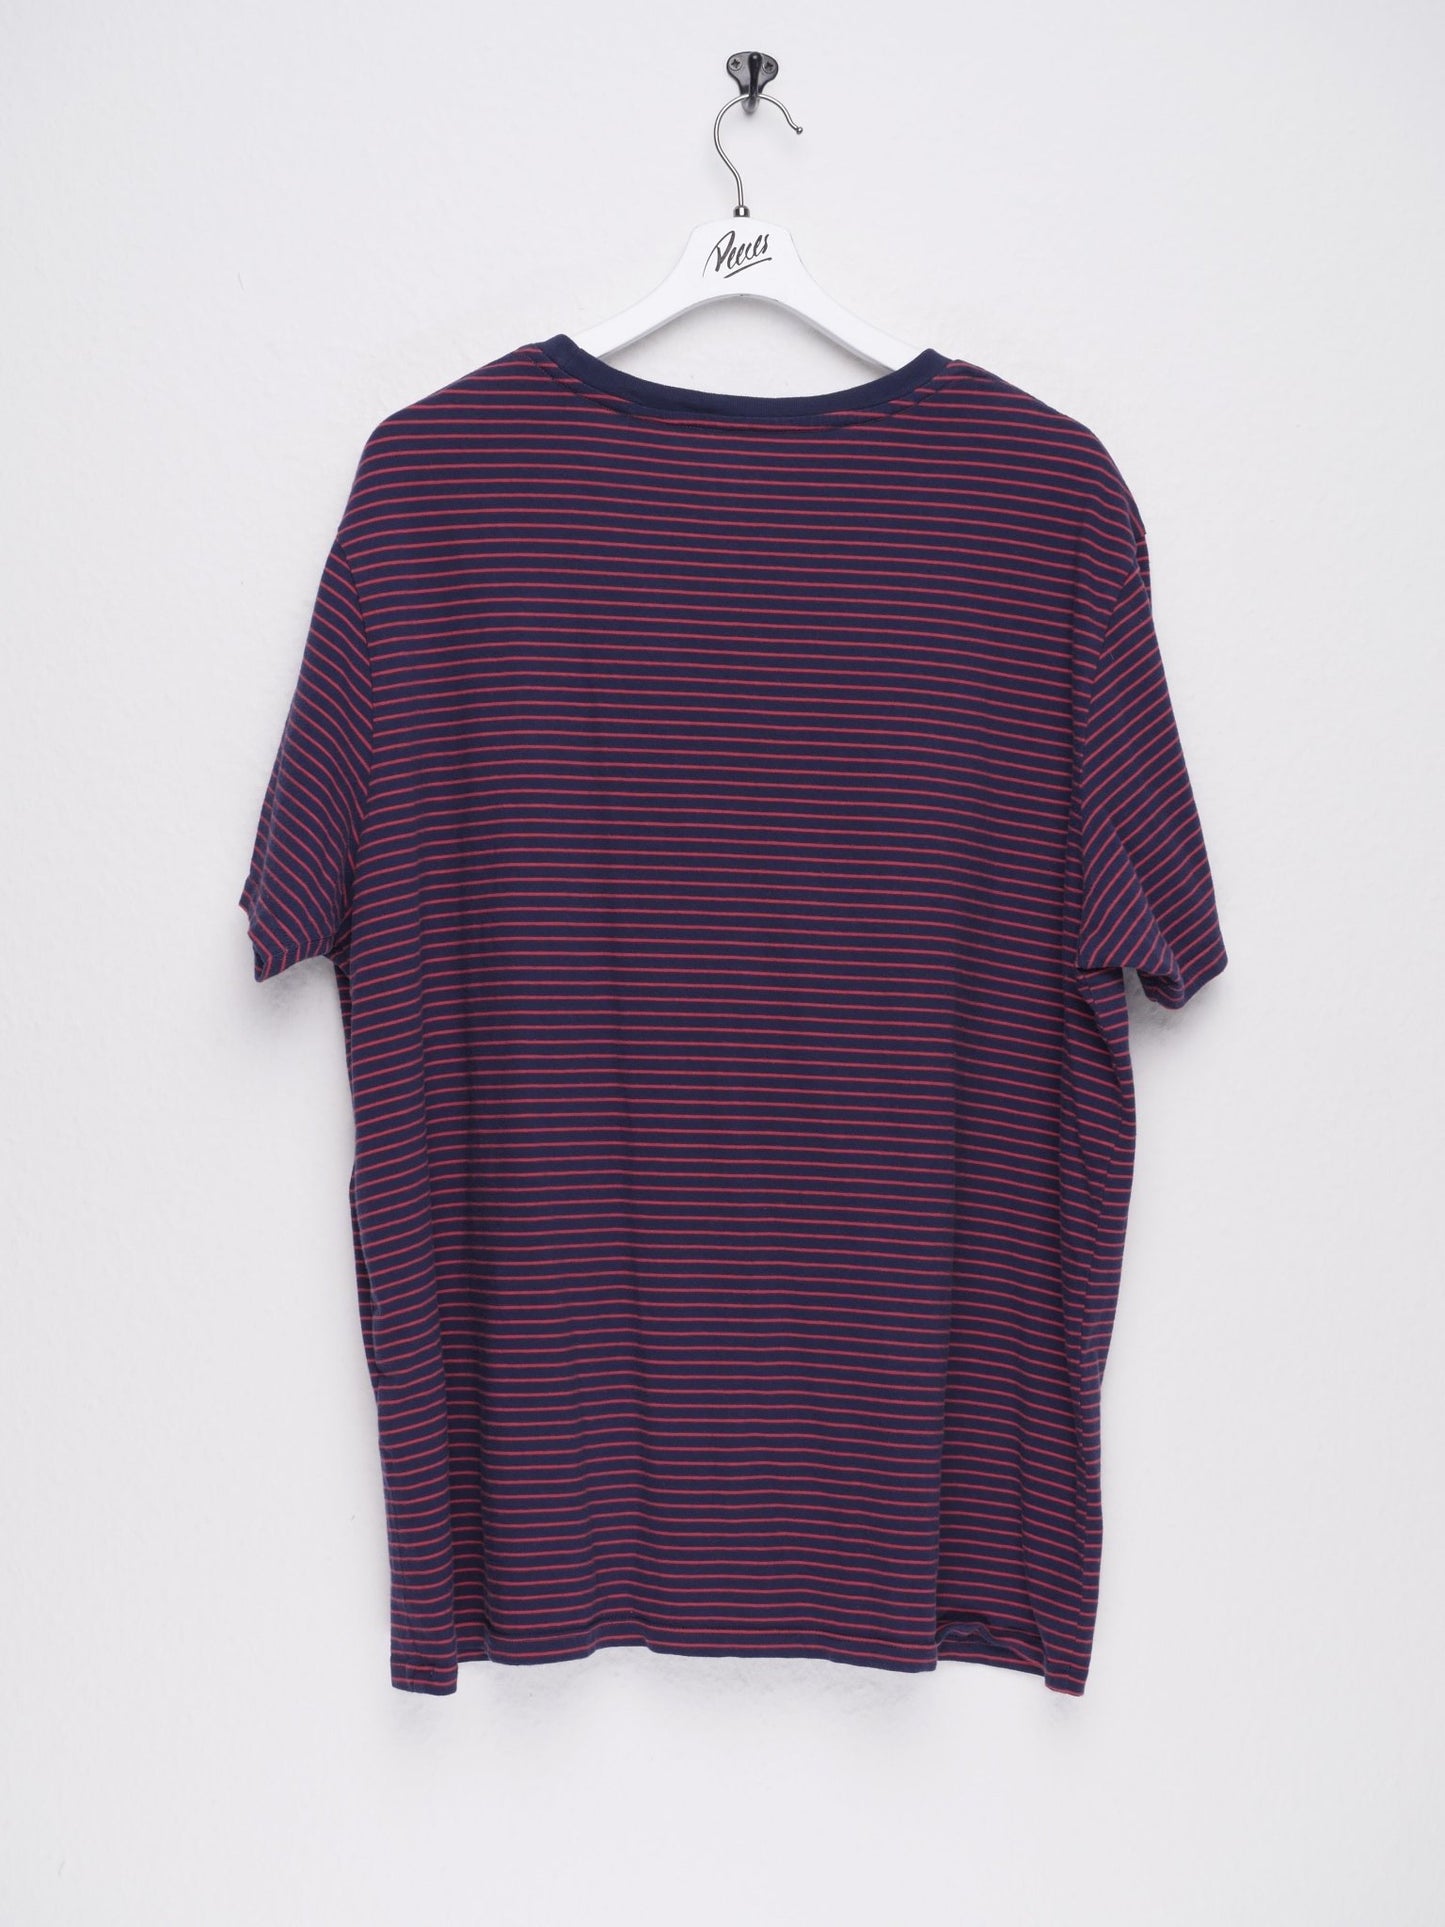 levis patched Logo two toned striped Shirt - Peeces